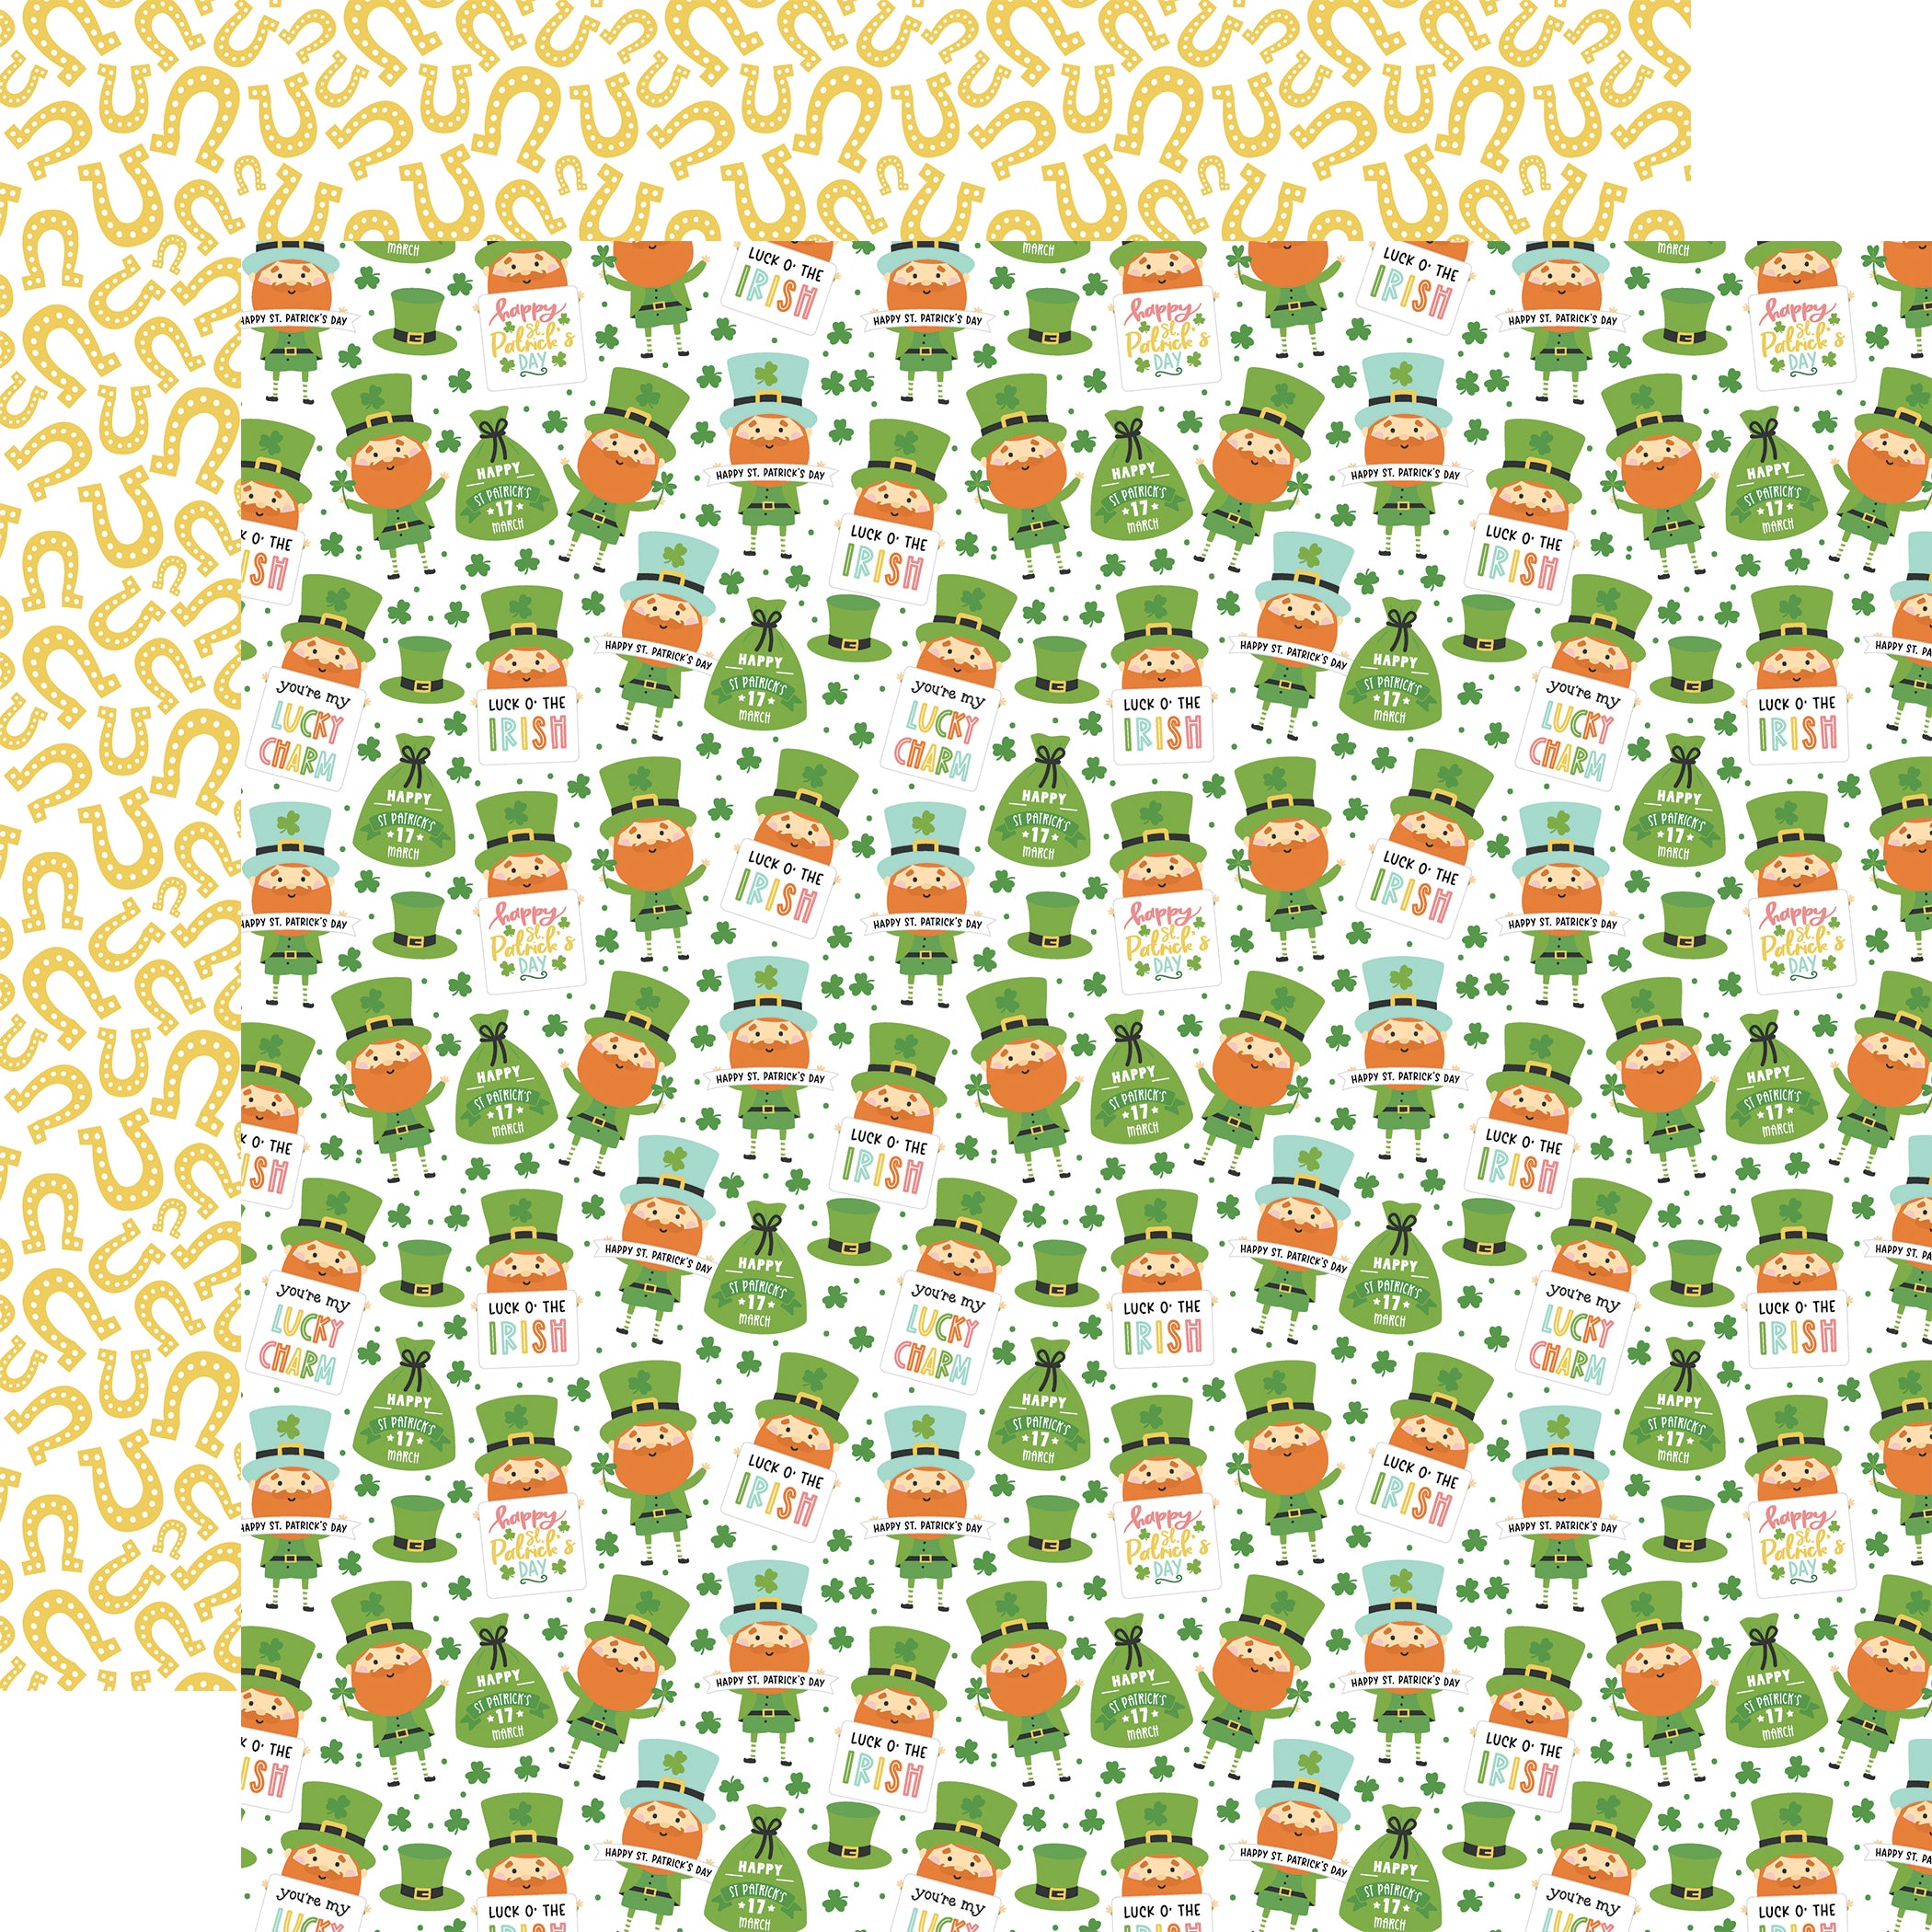 Happy St. Patrick's Day Collection You're My Lucky Charm 12 x 12 Double-Sided Scrapbook Paper by Echo Park Paper